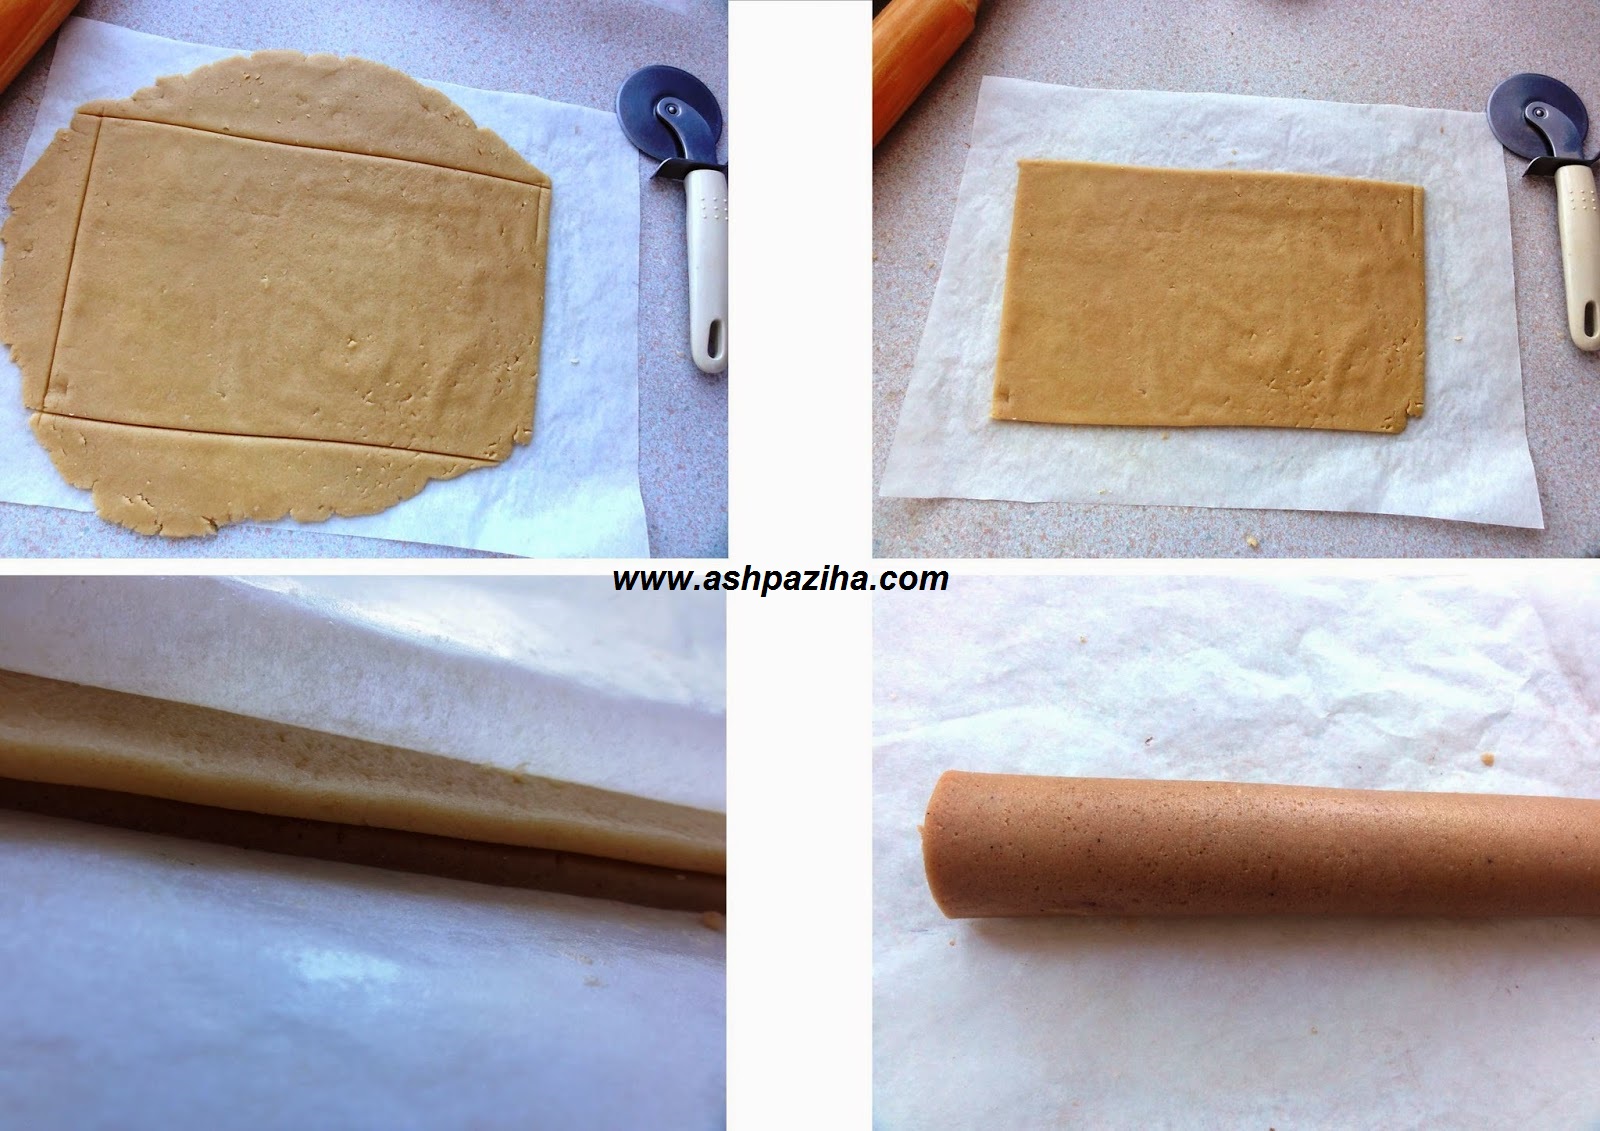 Mode - supplying - Biscuits - of roll - Cinnamon (2)